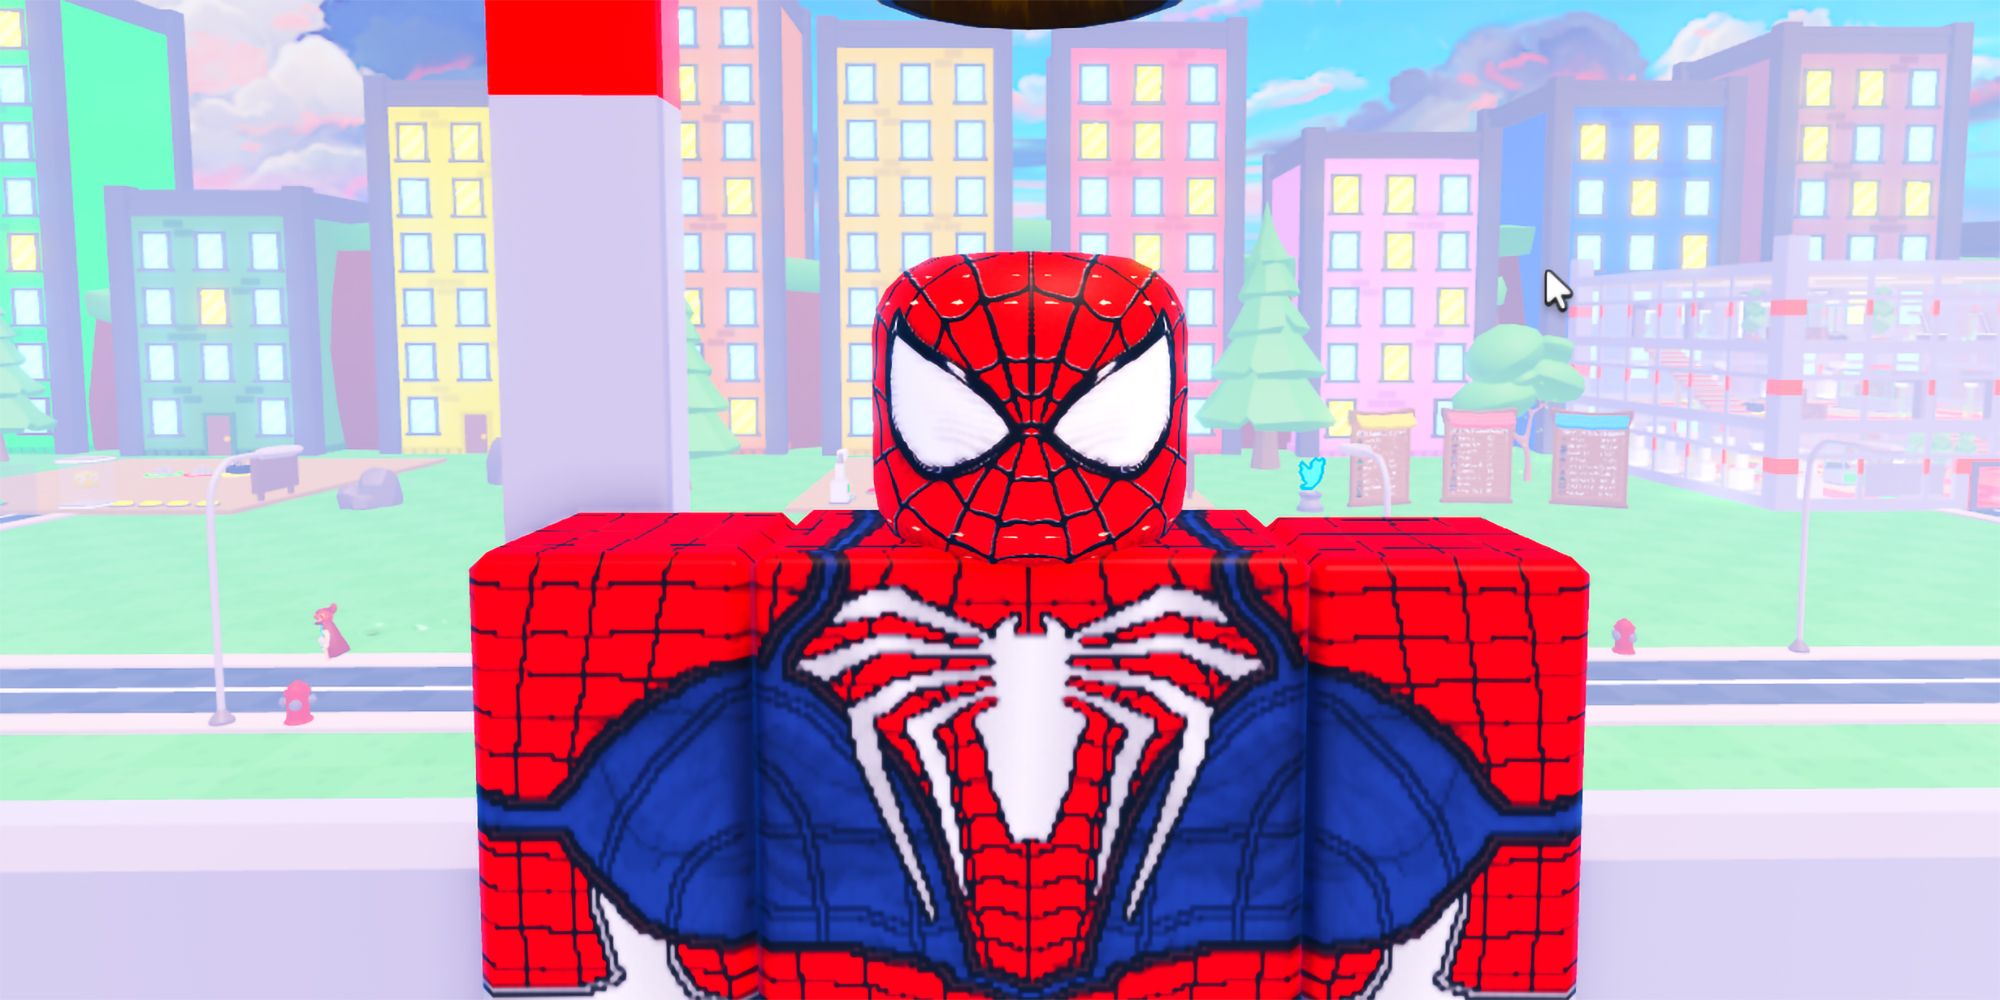 Spiderman stands at the top of his Tycoon tower in the Roblox game Hero Power Tycoon.